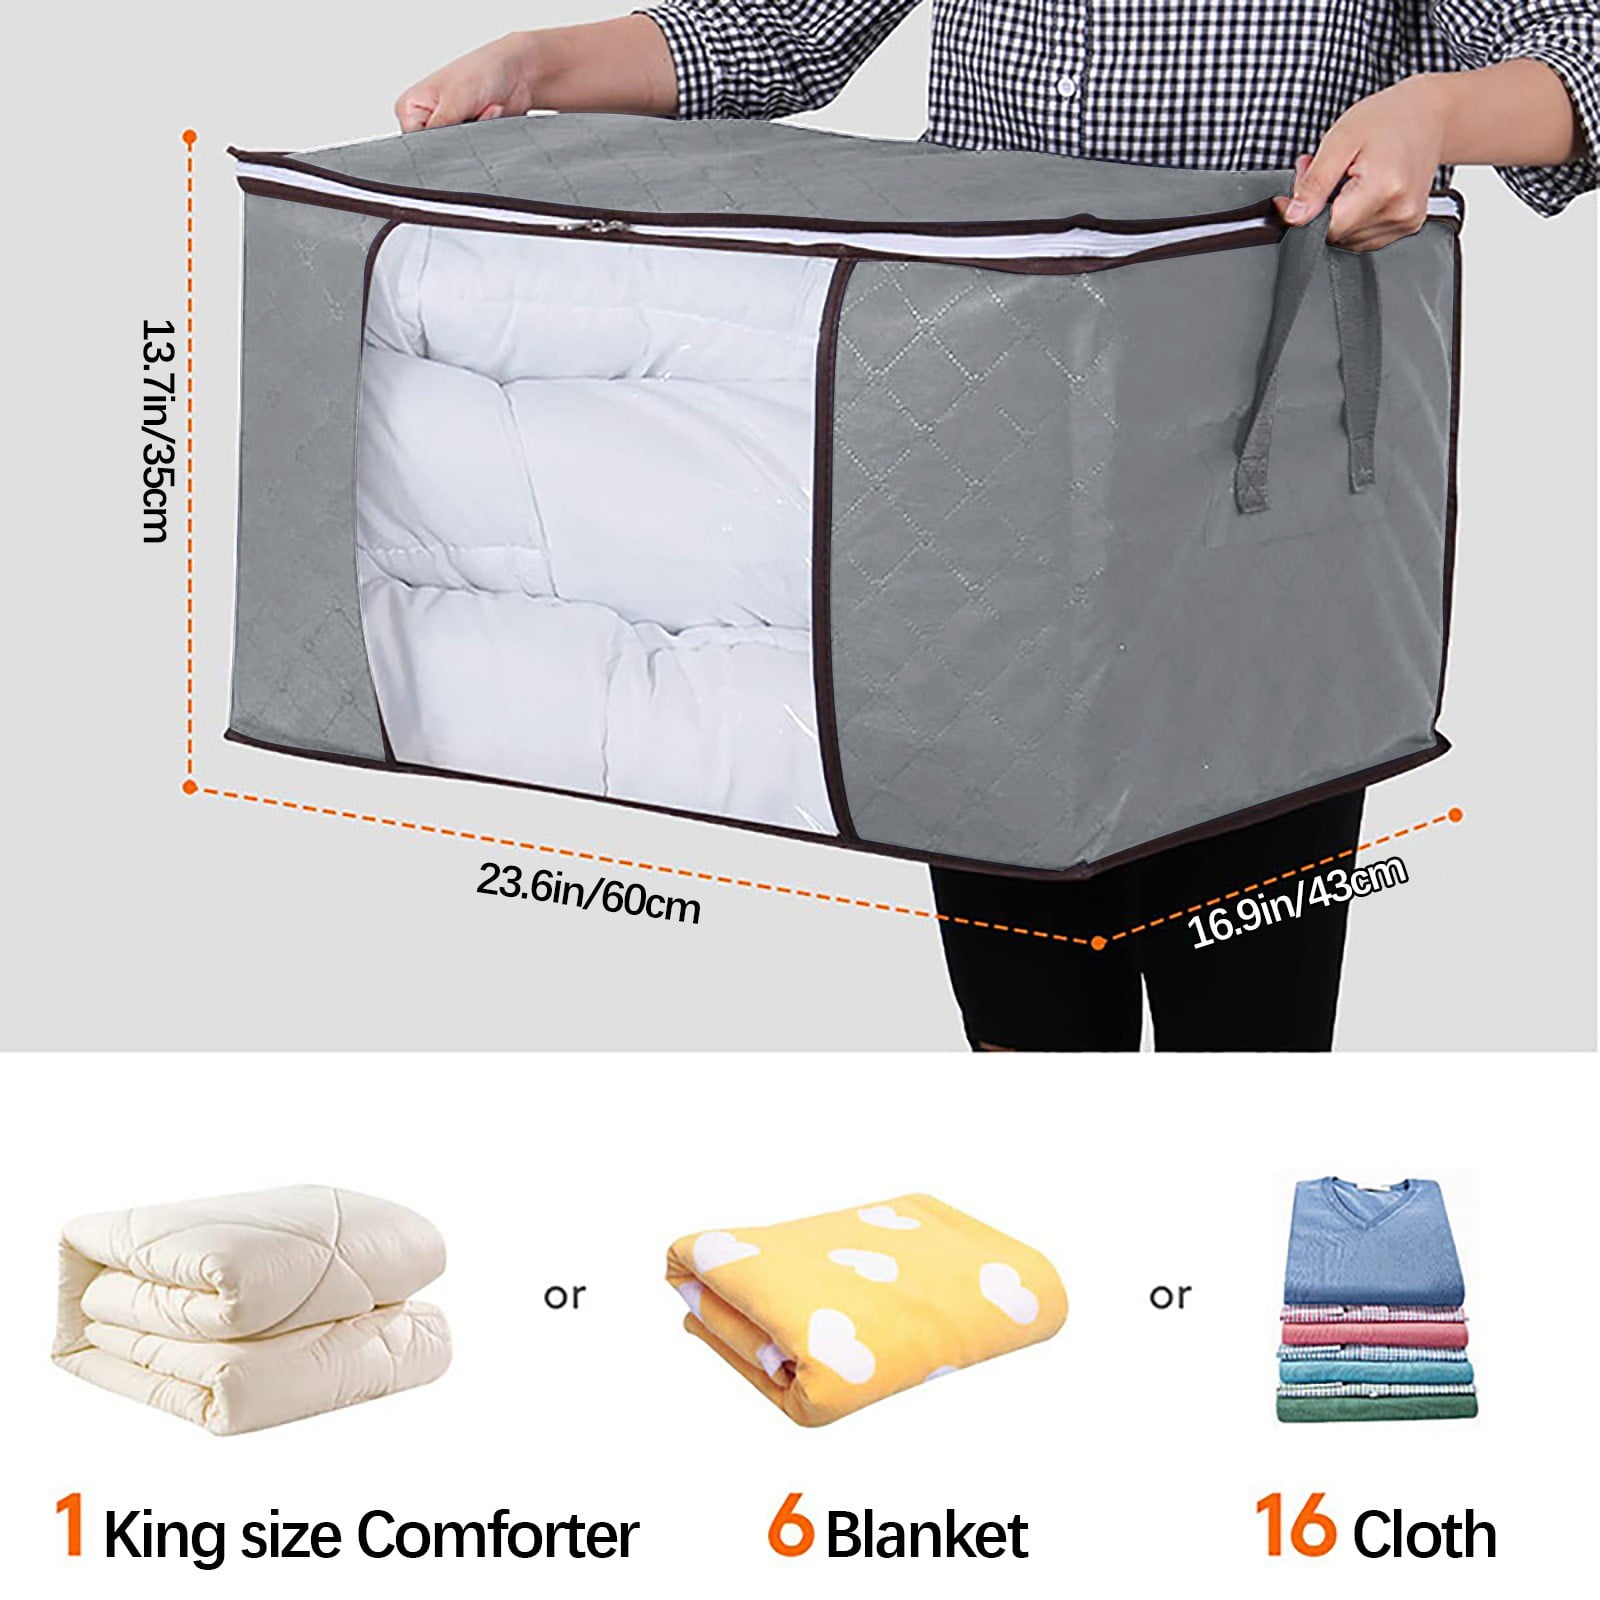 Overmonup 39x59 Inches Durable Giant Storage Bag Perfect for  Dustproof,Moistureproof,Trunk,Blanket, Chairs, Baggage,Suitcases etc.(set  of 10)